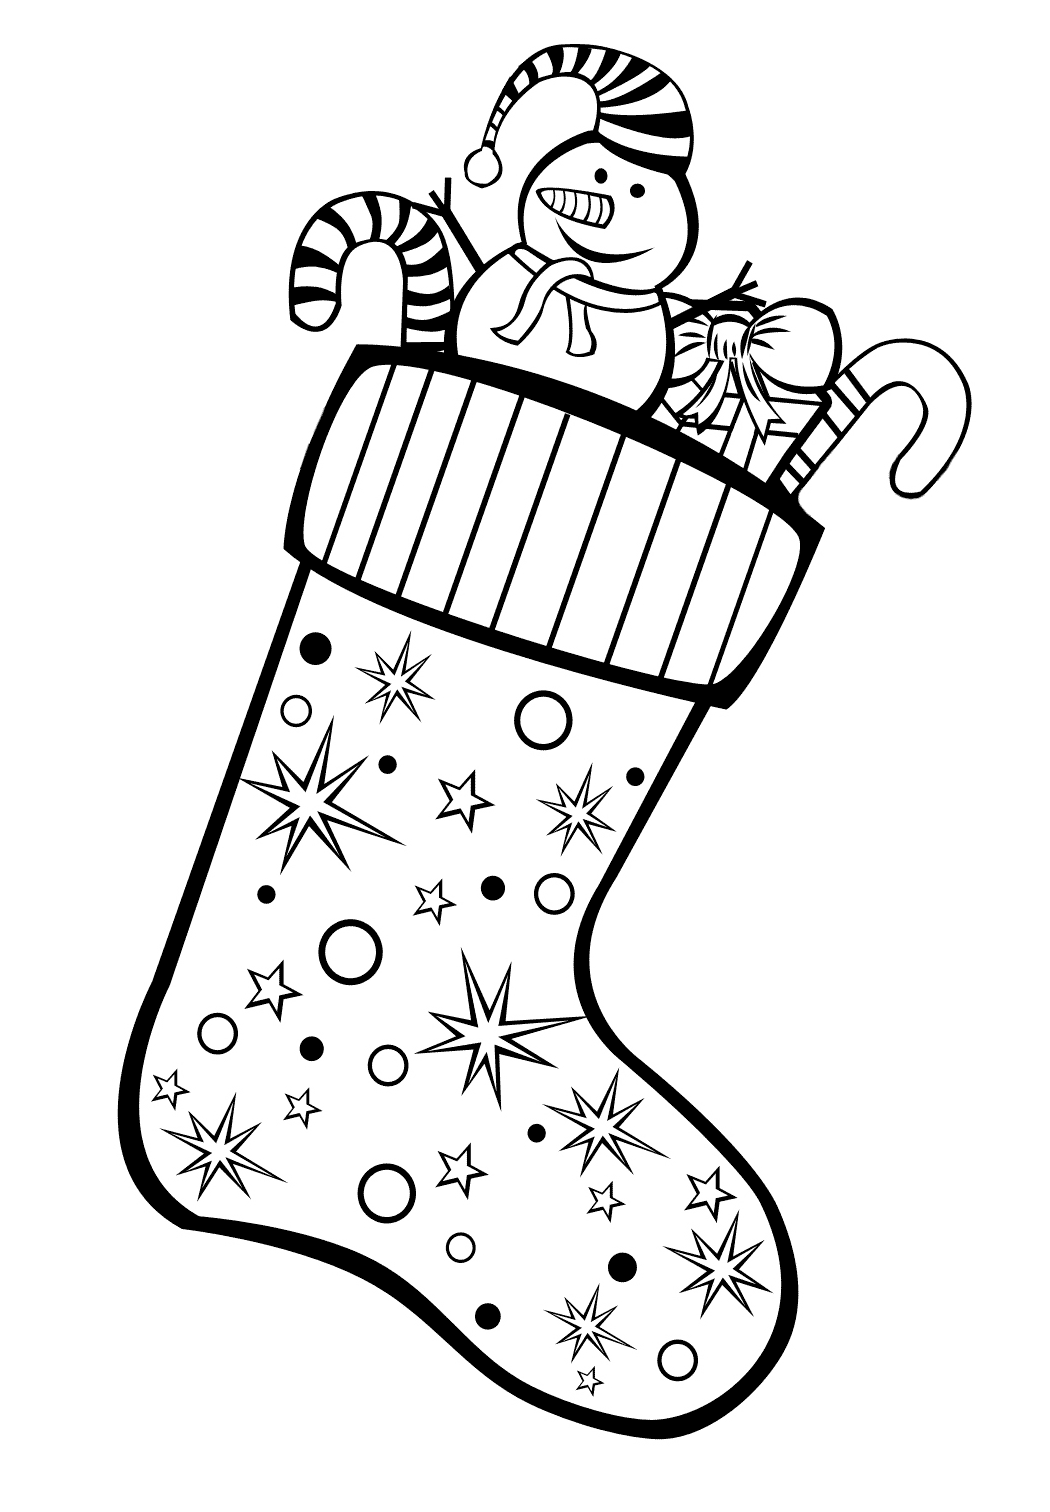 Coloring page Stocking full of gifts